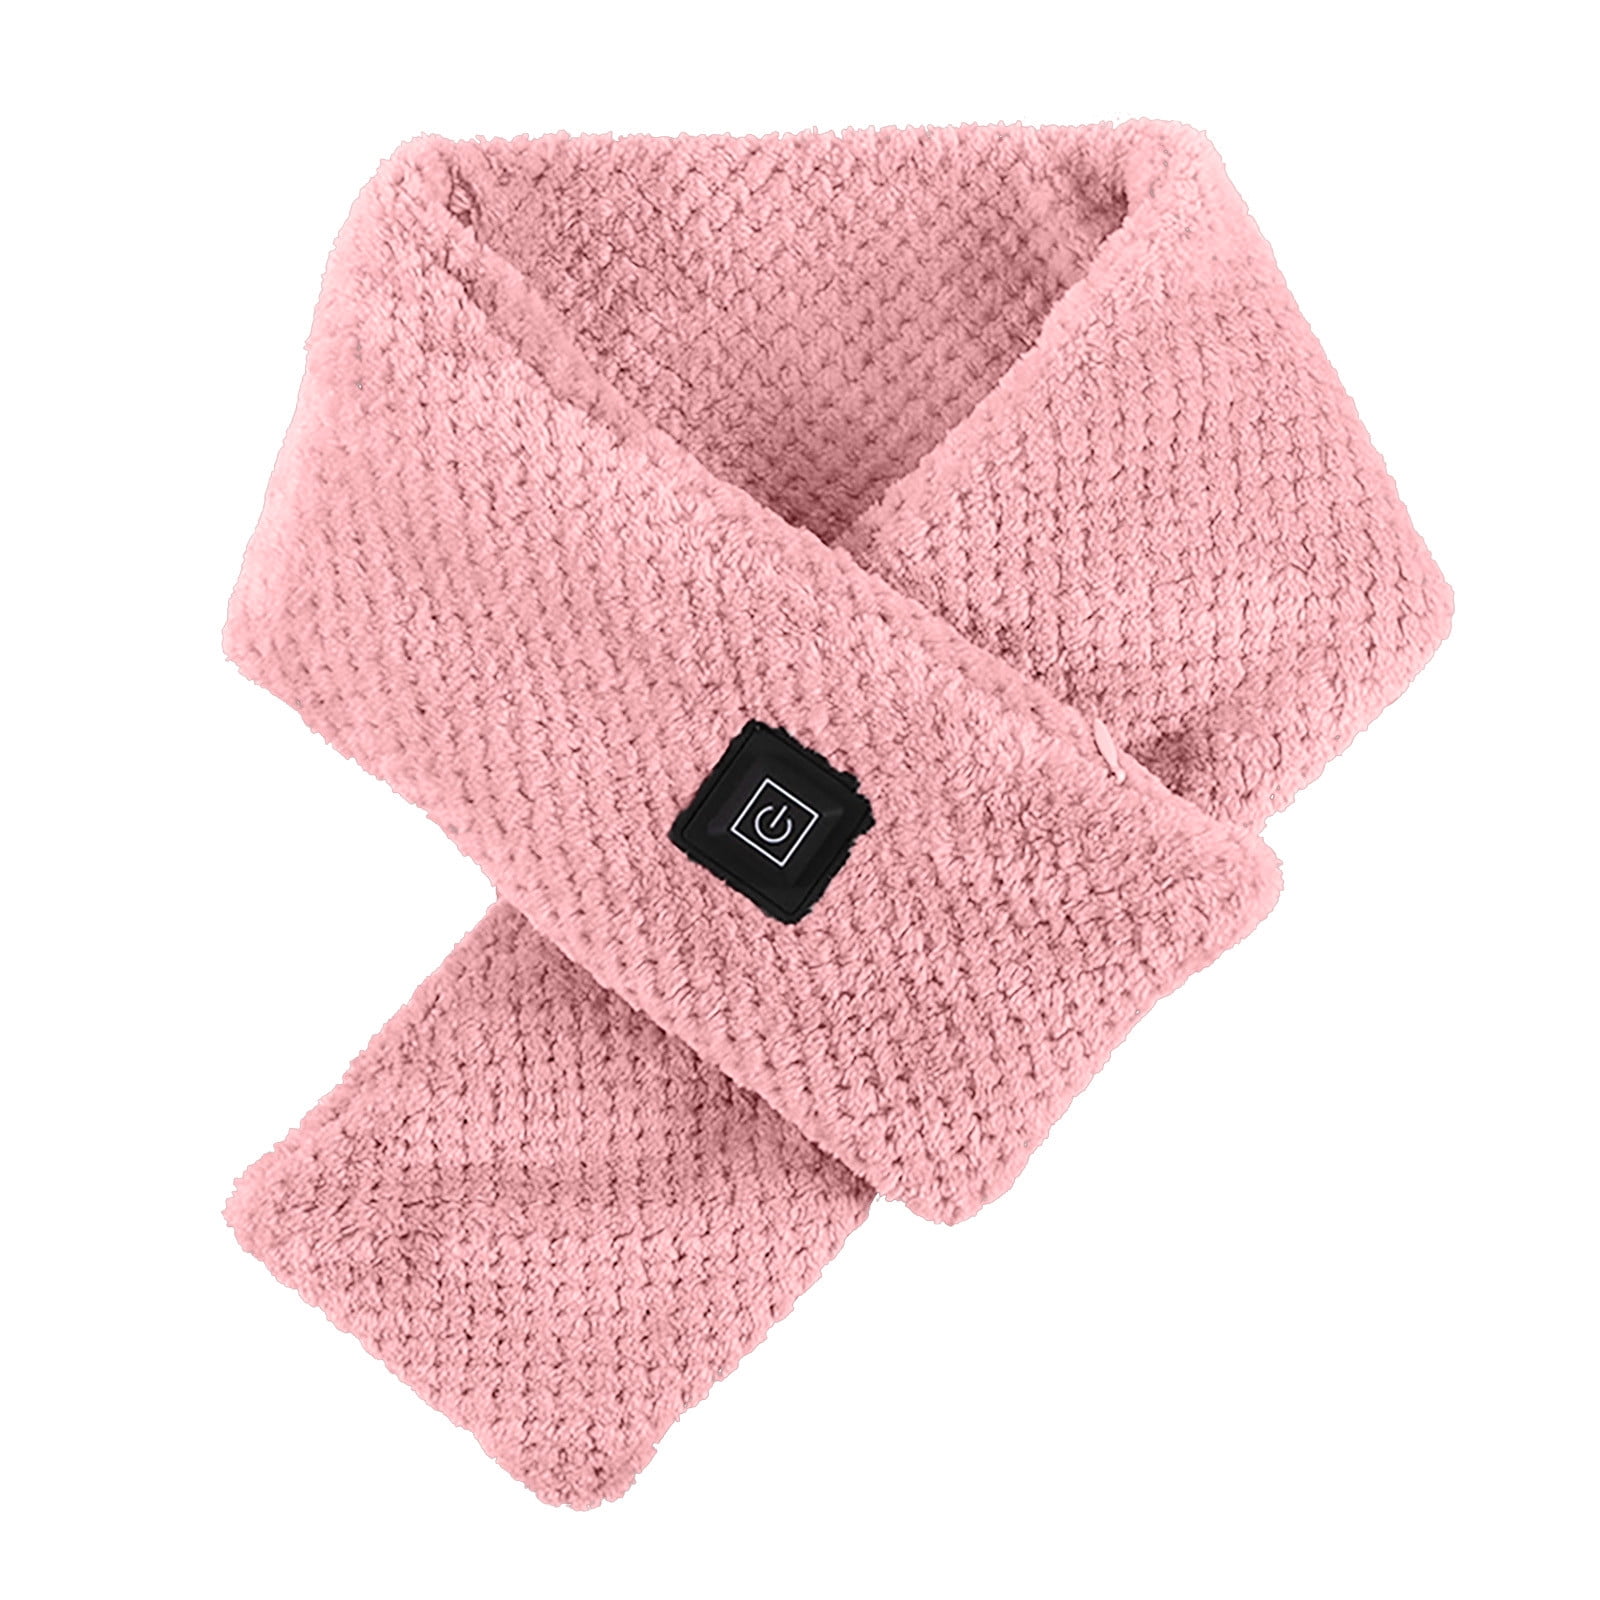 Crownhot Rechargeable Heated Scarf for Women Coral Fleece Heated Scarf Heating Scarf USB Heated Scarfs for Women Cycling Motorcycle Skiing Outdoor Sports Christmas